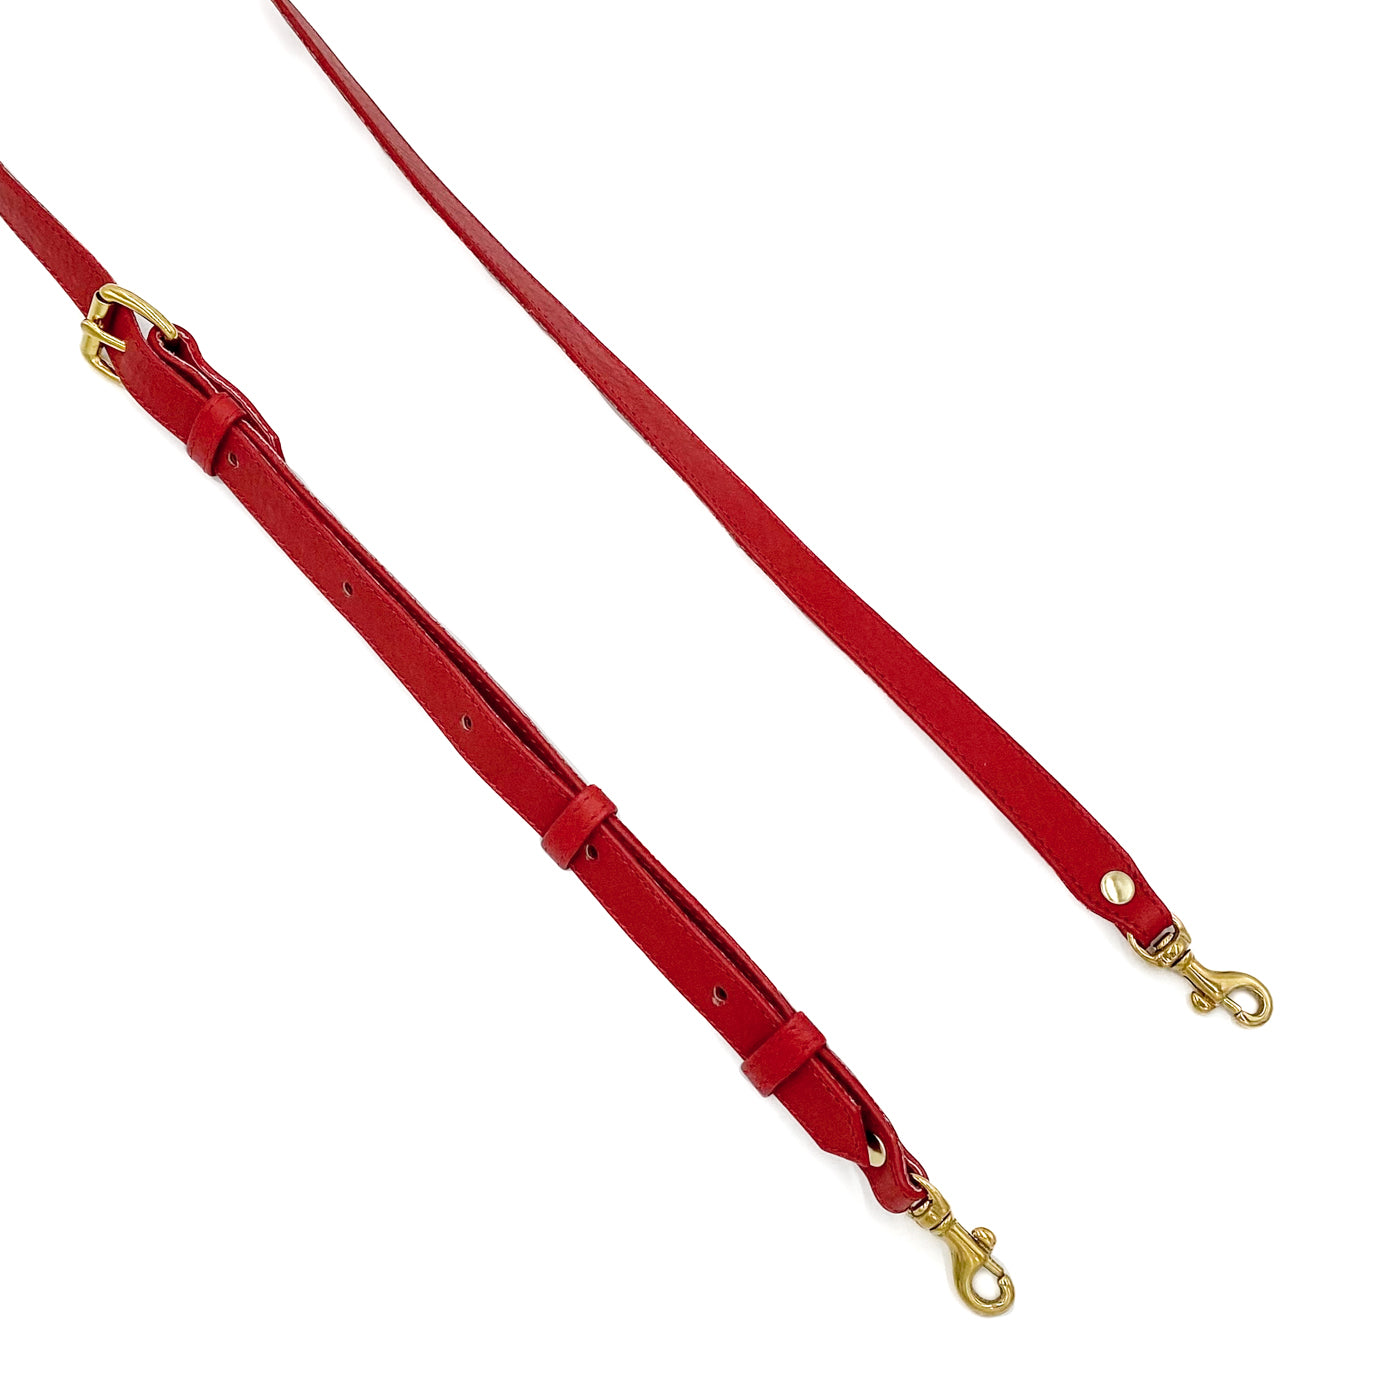 Leather crossbody strap in red with gold hardware